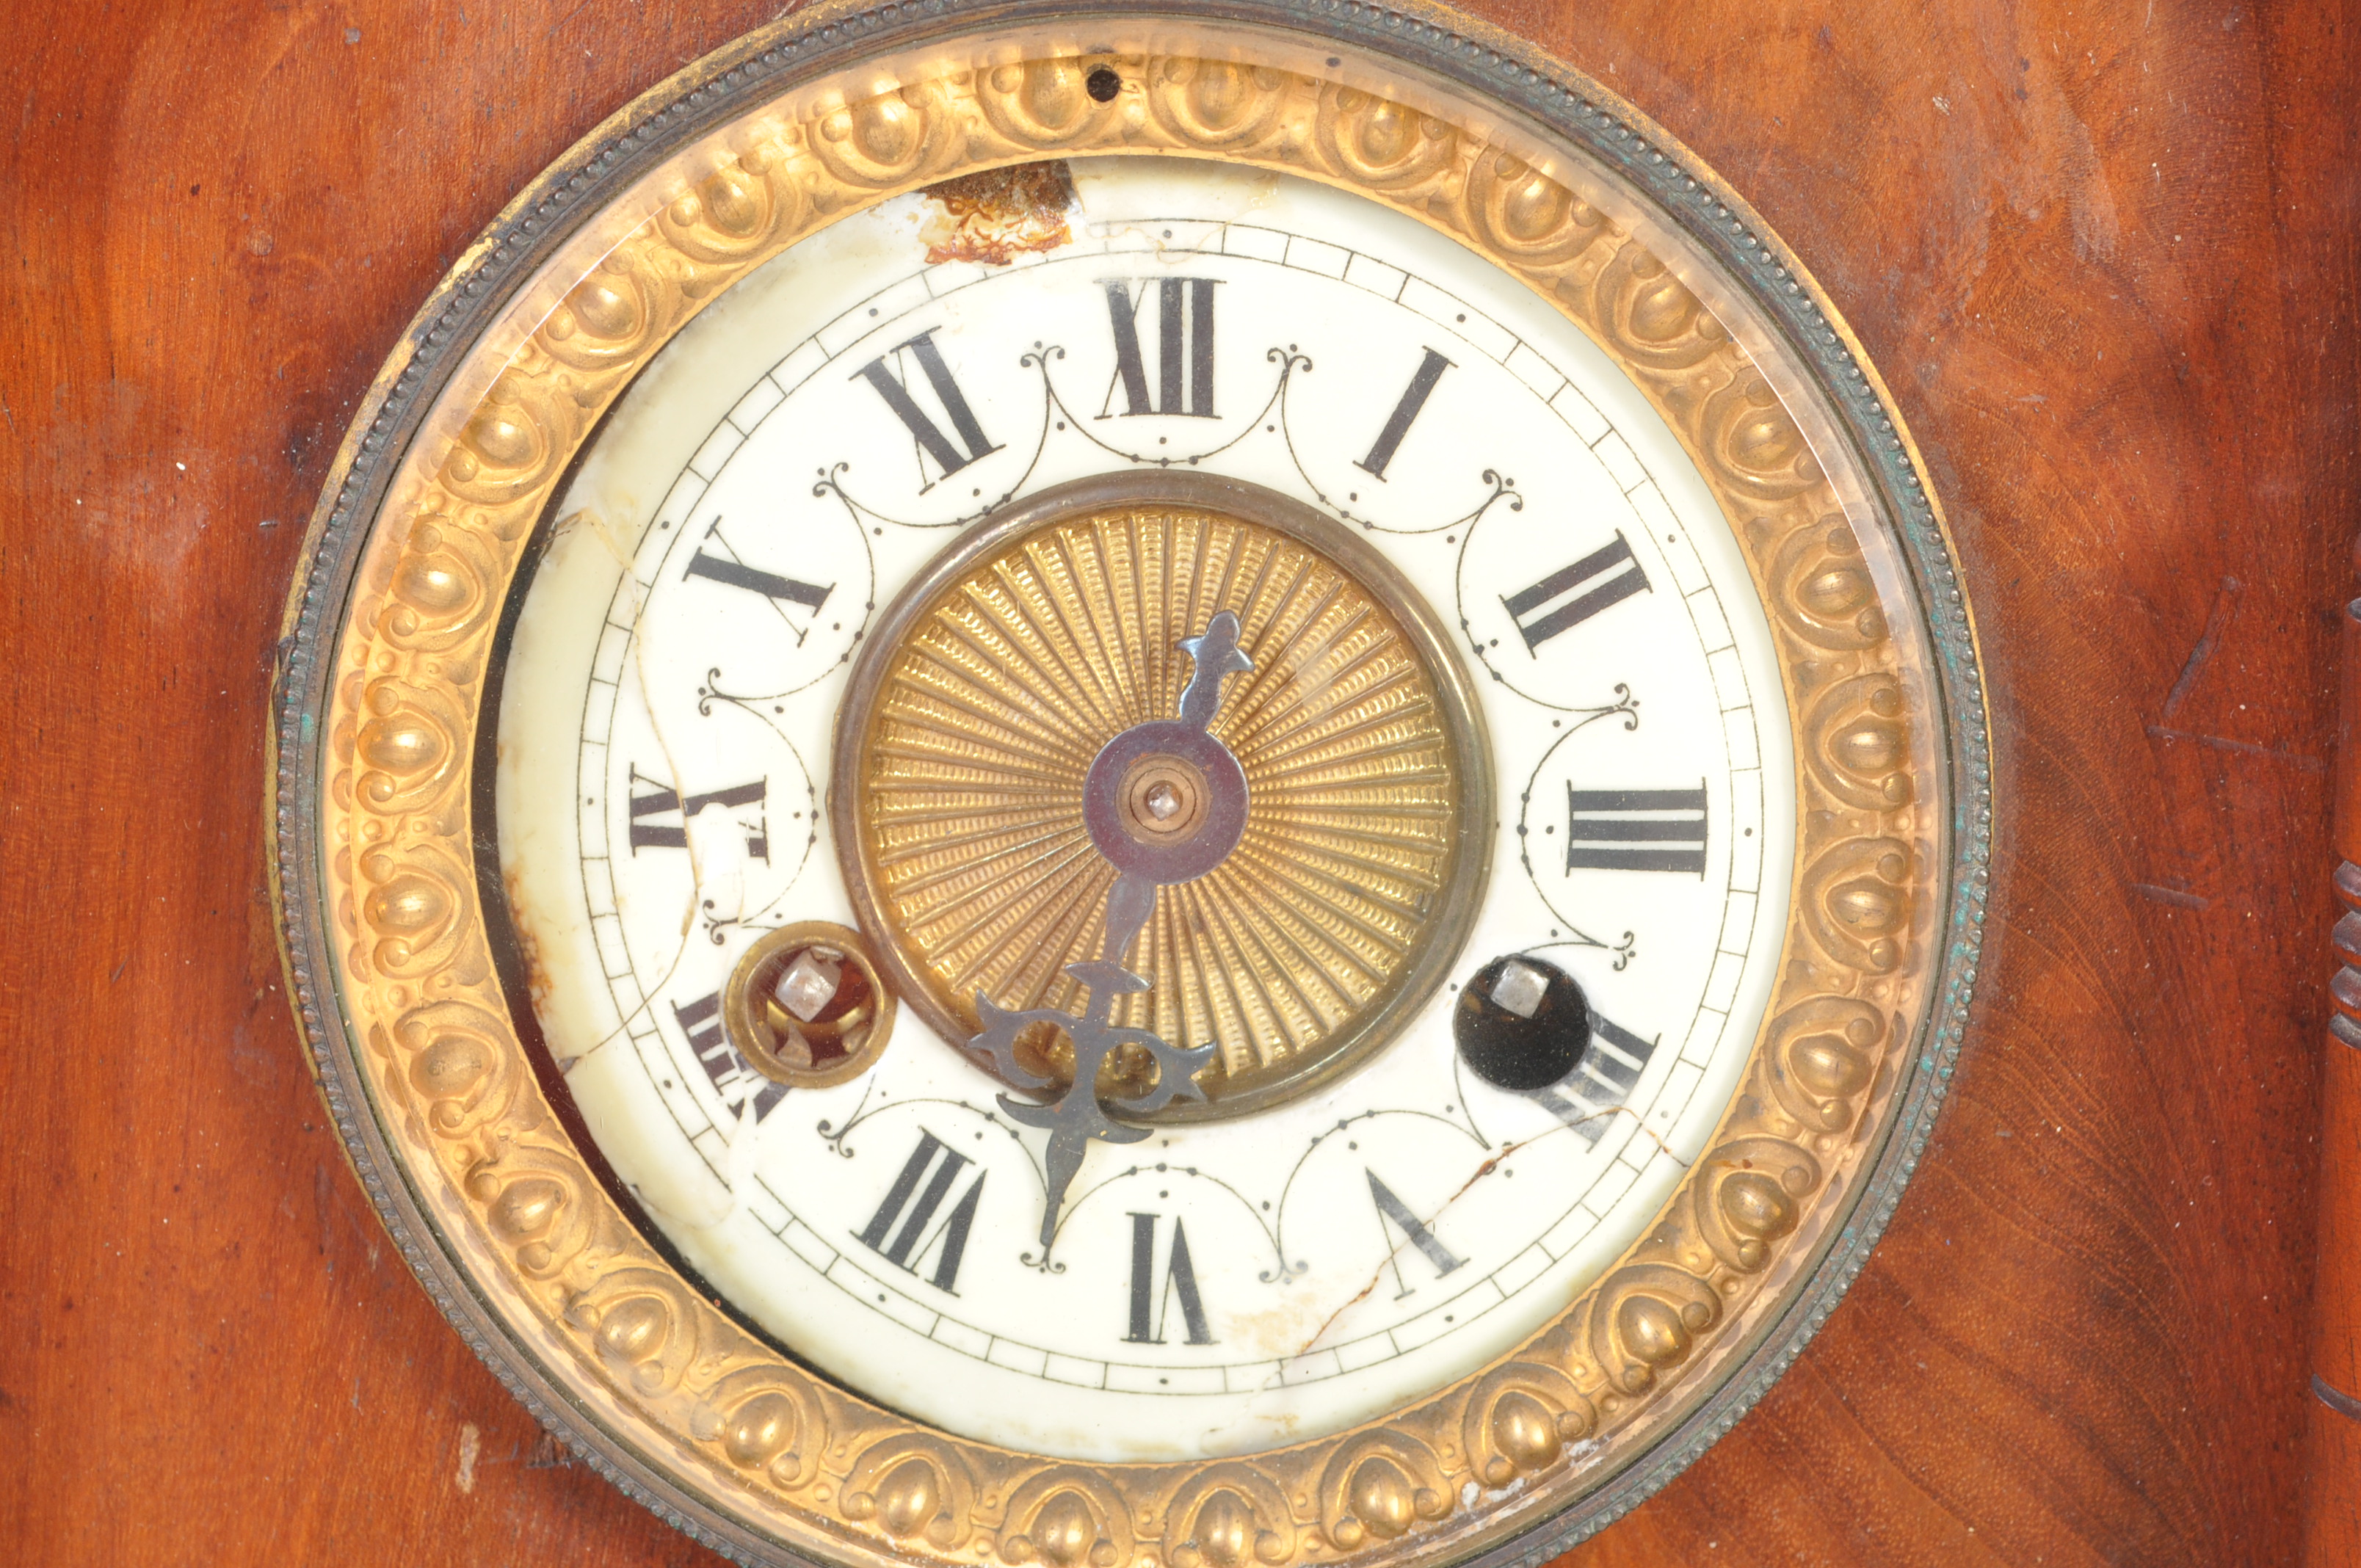 EARLY 20TH CENTURY JUNGHANS GRANDDAUGHTER CLOCK - Image 3 of 6